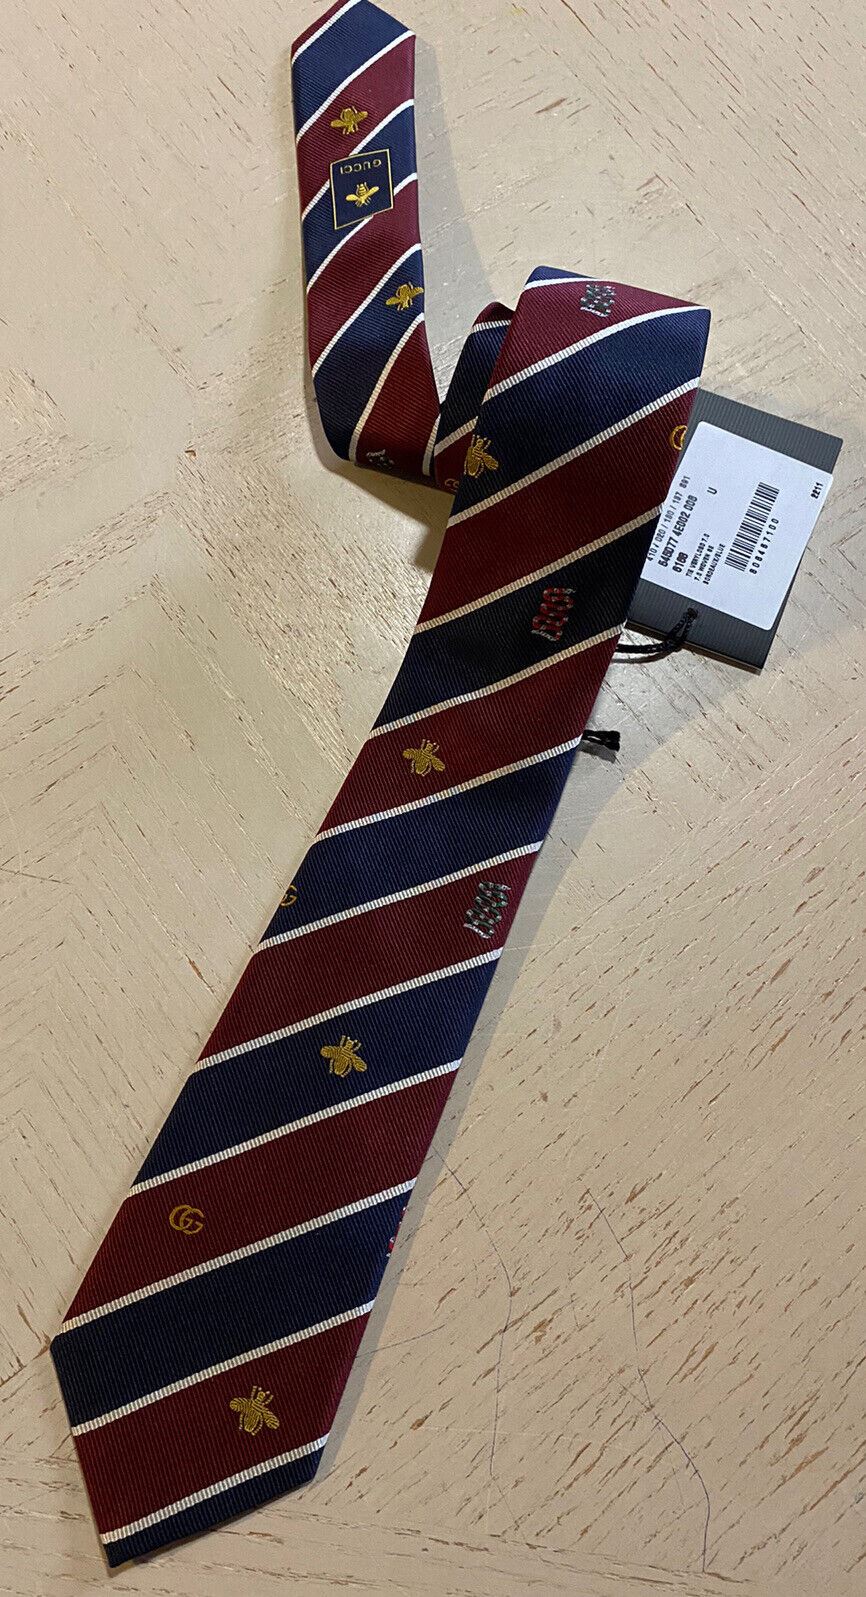 New Gucci Mens GG /Bee/Snake Printed Silk  Neck Tie Navy/Burgundy Italy